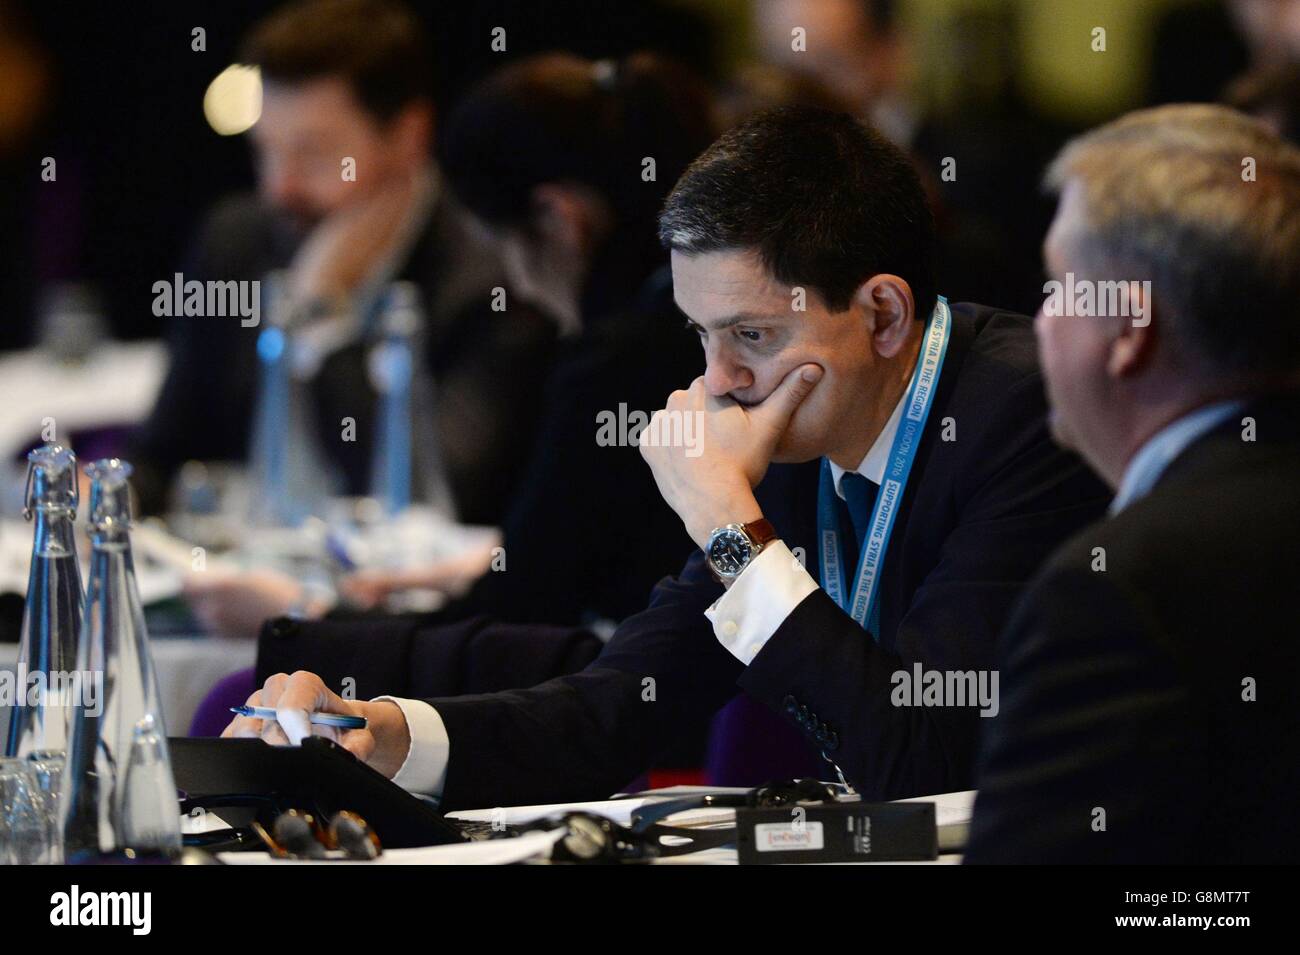 Former Foreign Secretary and President of the International Rescue Committee, David Miliband, attends a focus event at the 'Supporting Syria and the Region' conference at the Queen Elizabeth II Conference Centre in London. Stock Photo